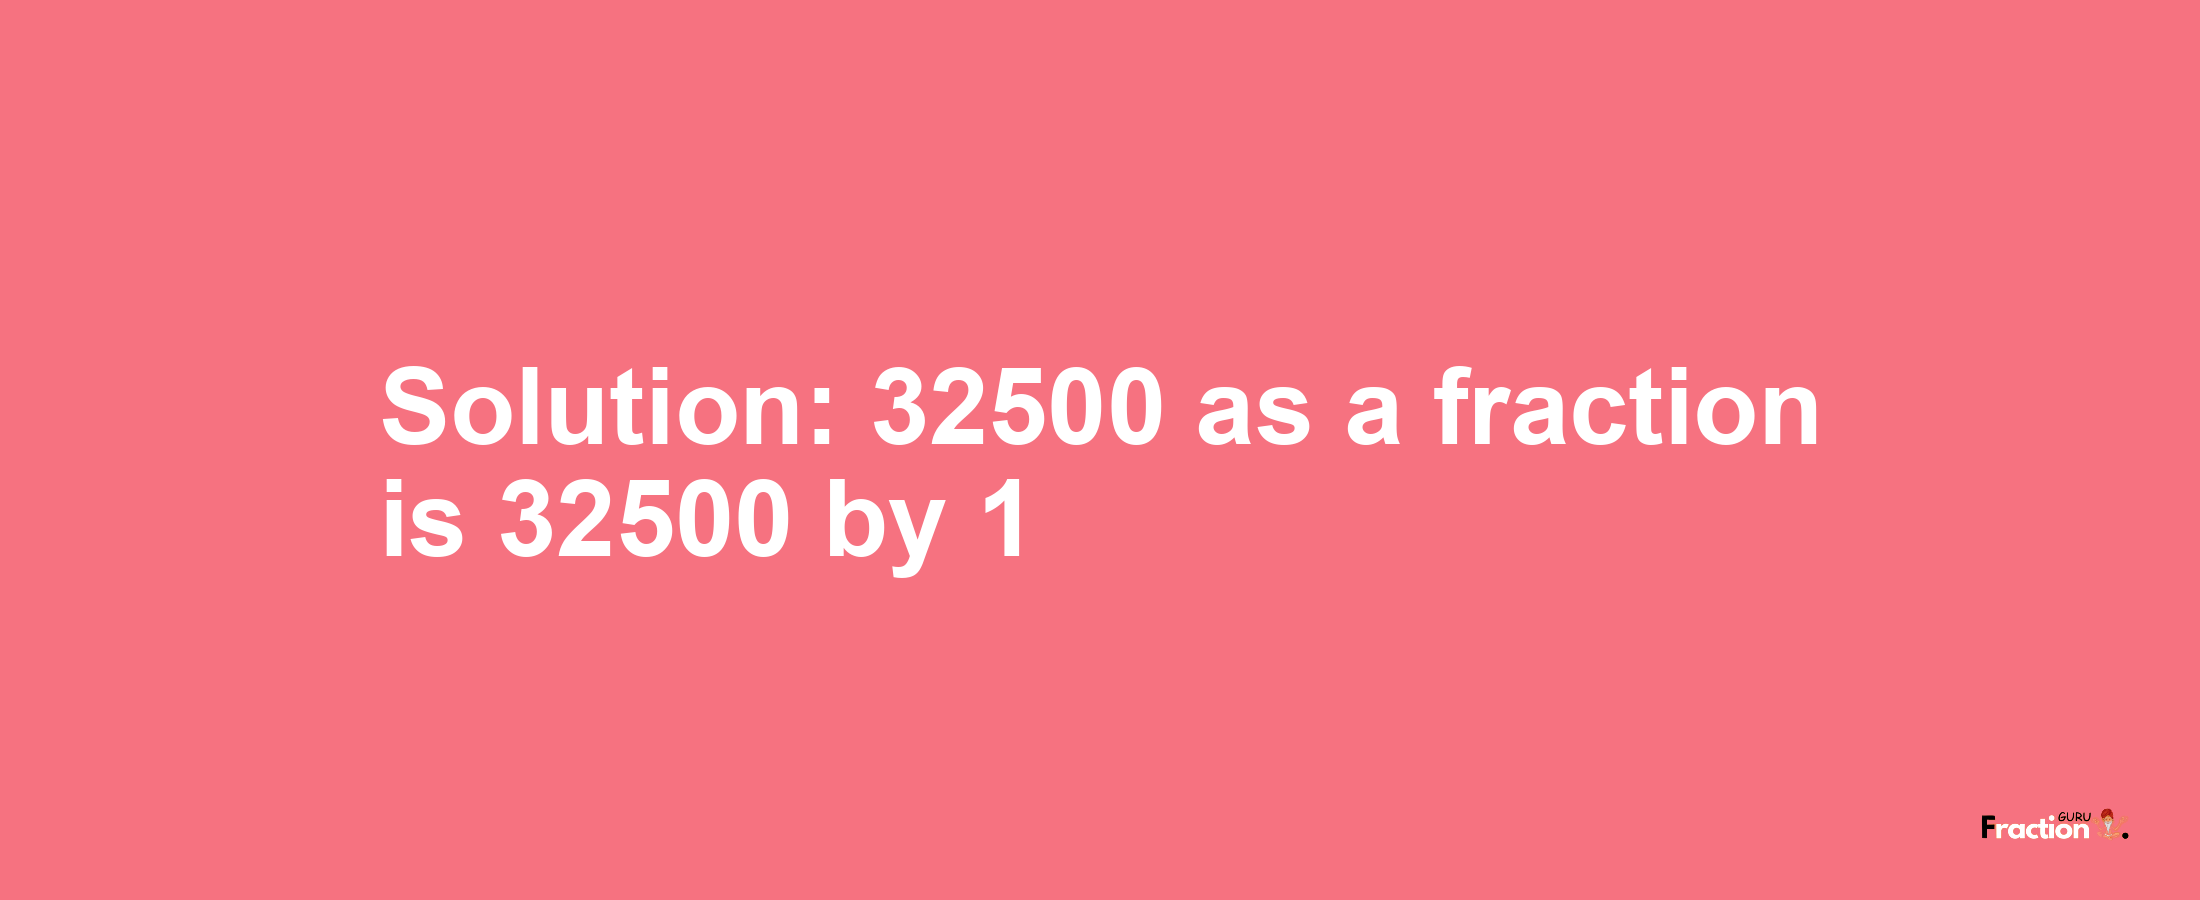 Solution:32500 as a fraction is 32500/1